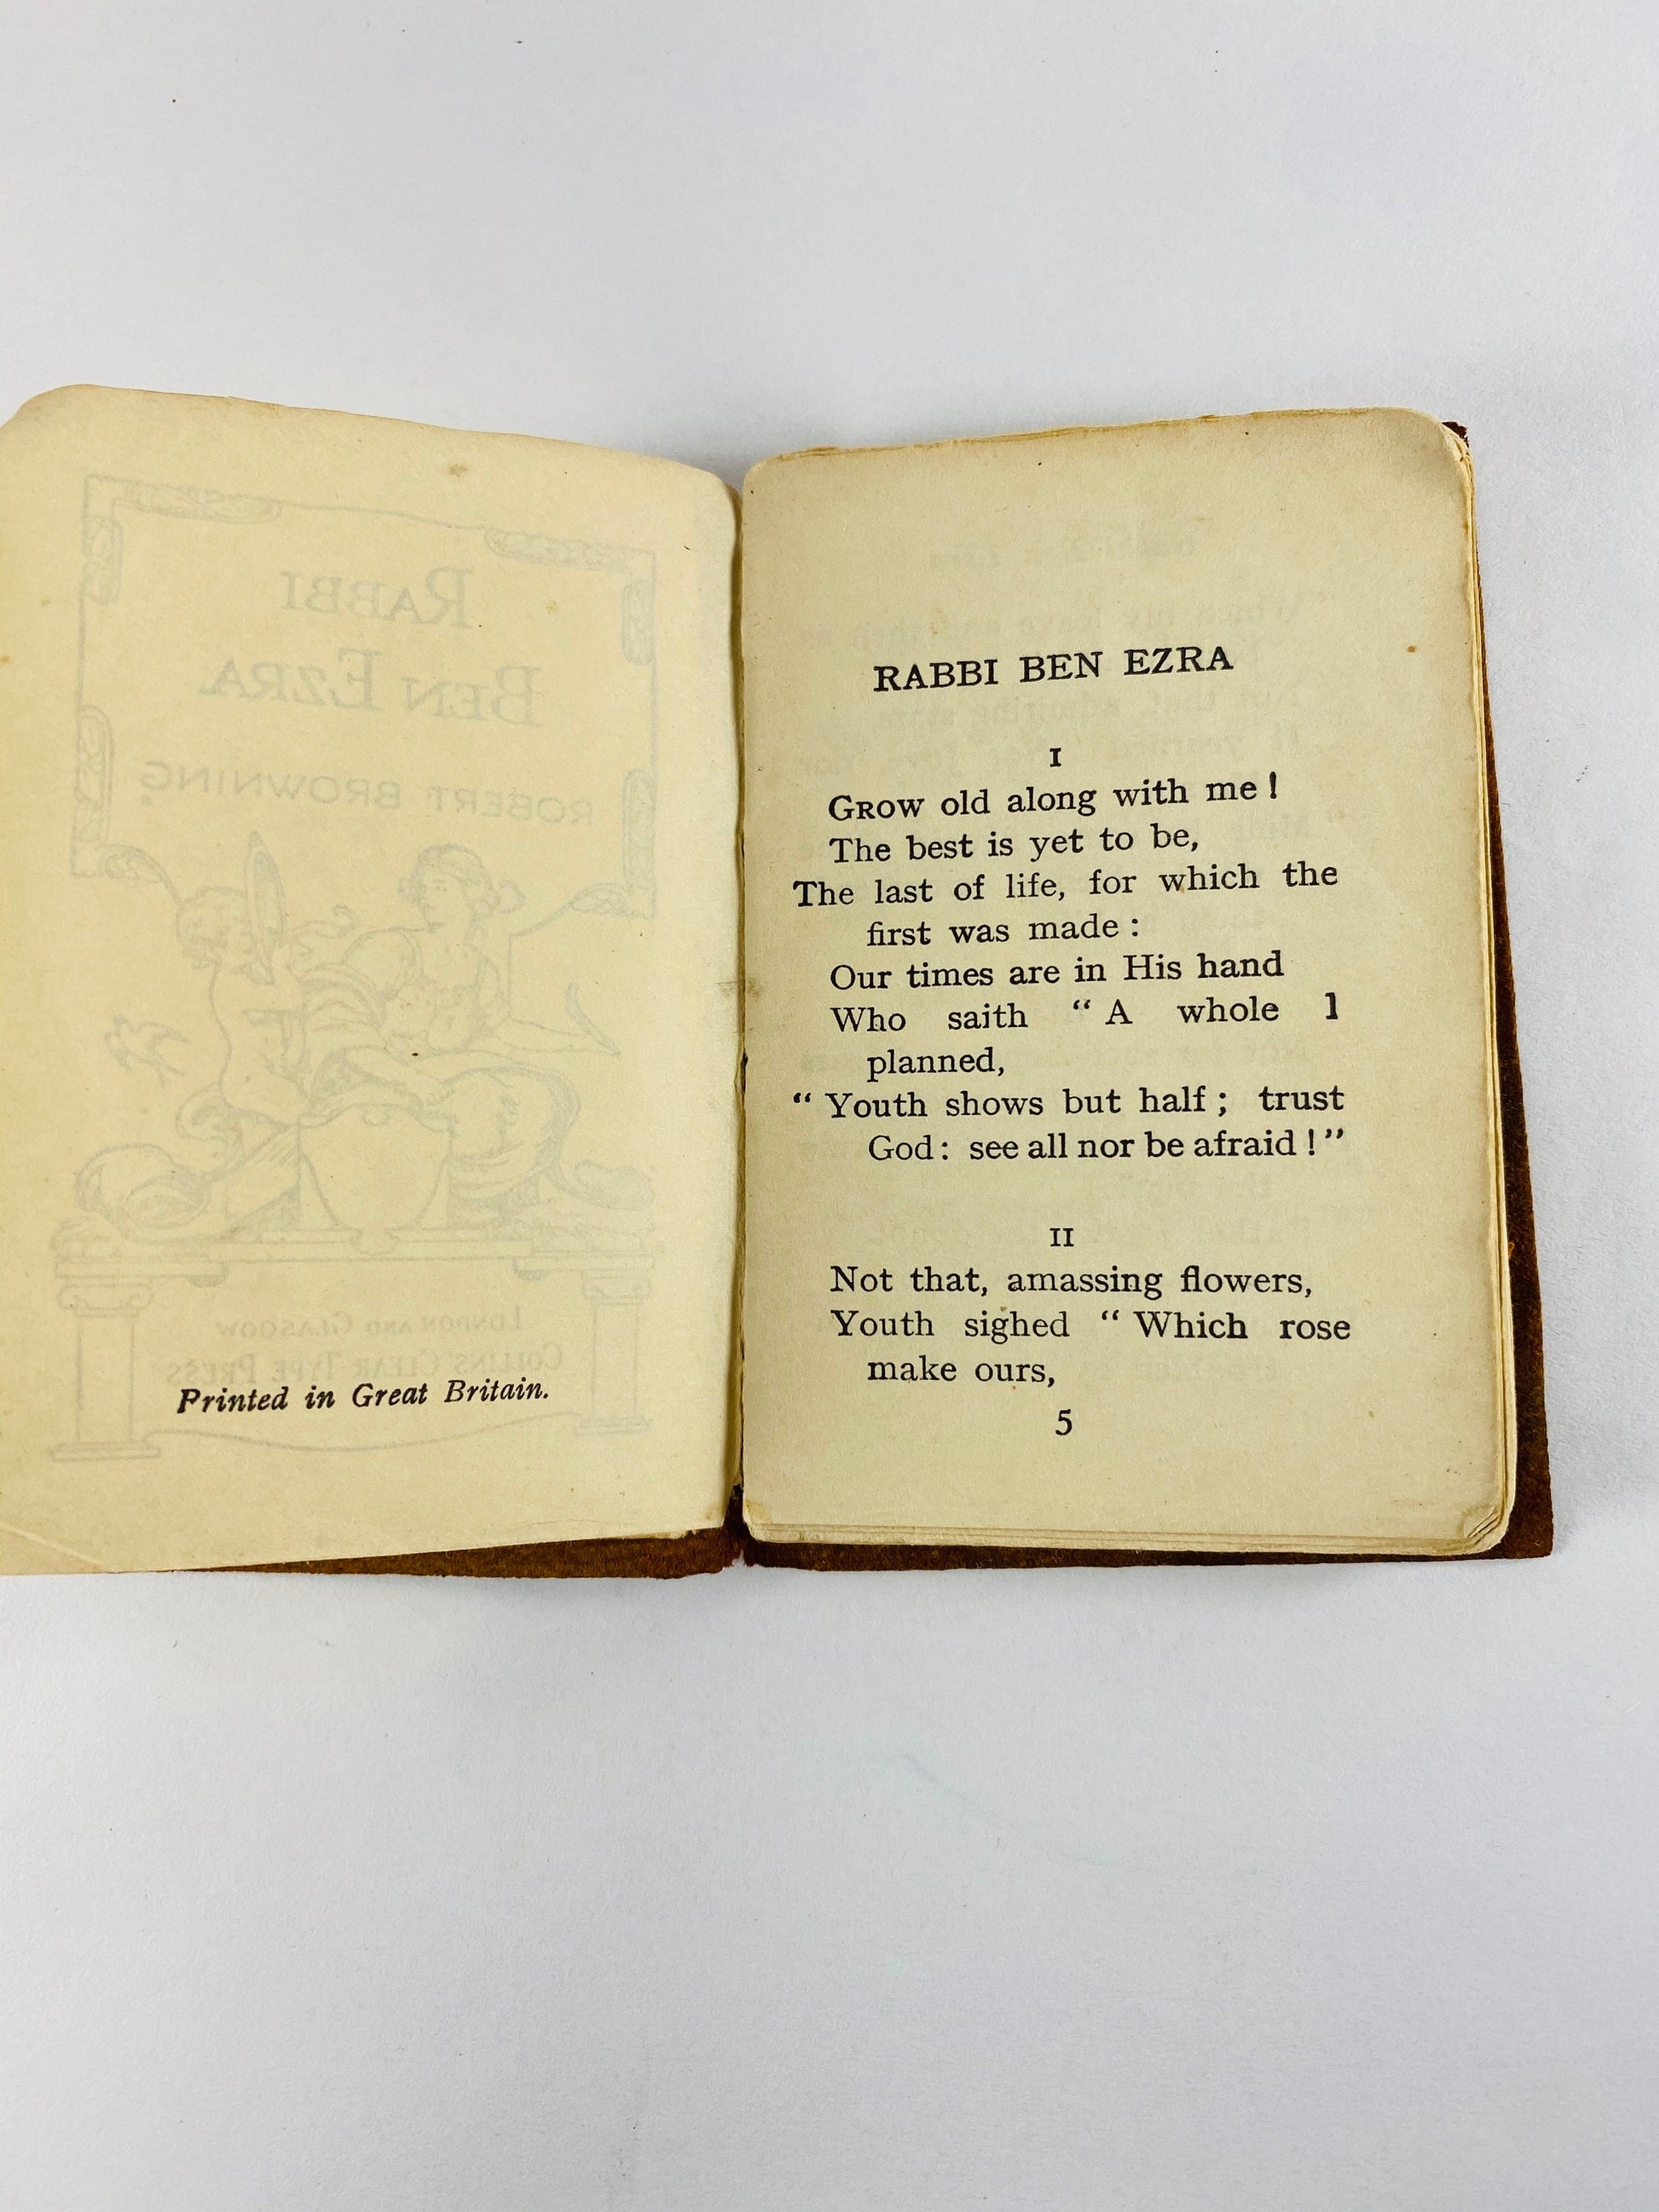 1888 Antique 19th century miniature poetry book by Robert Browning, Rabbi Ben Ezra "Grow old along with me! The best is yet to be"